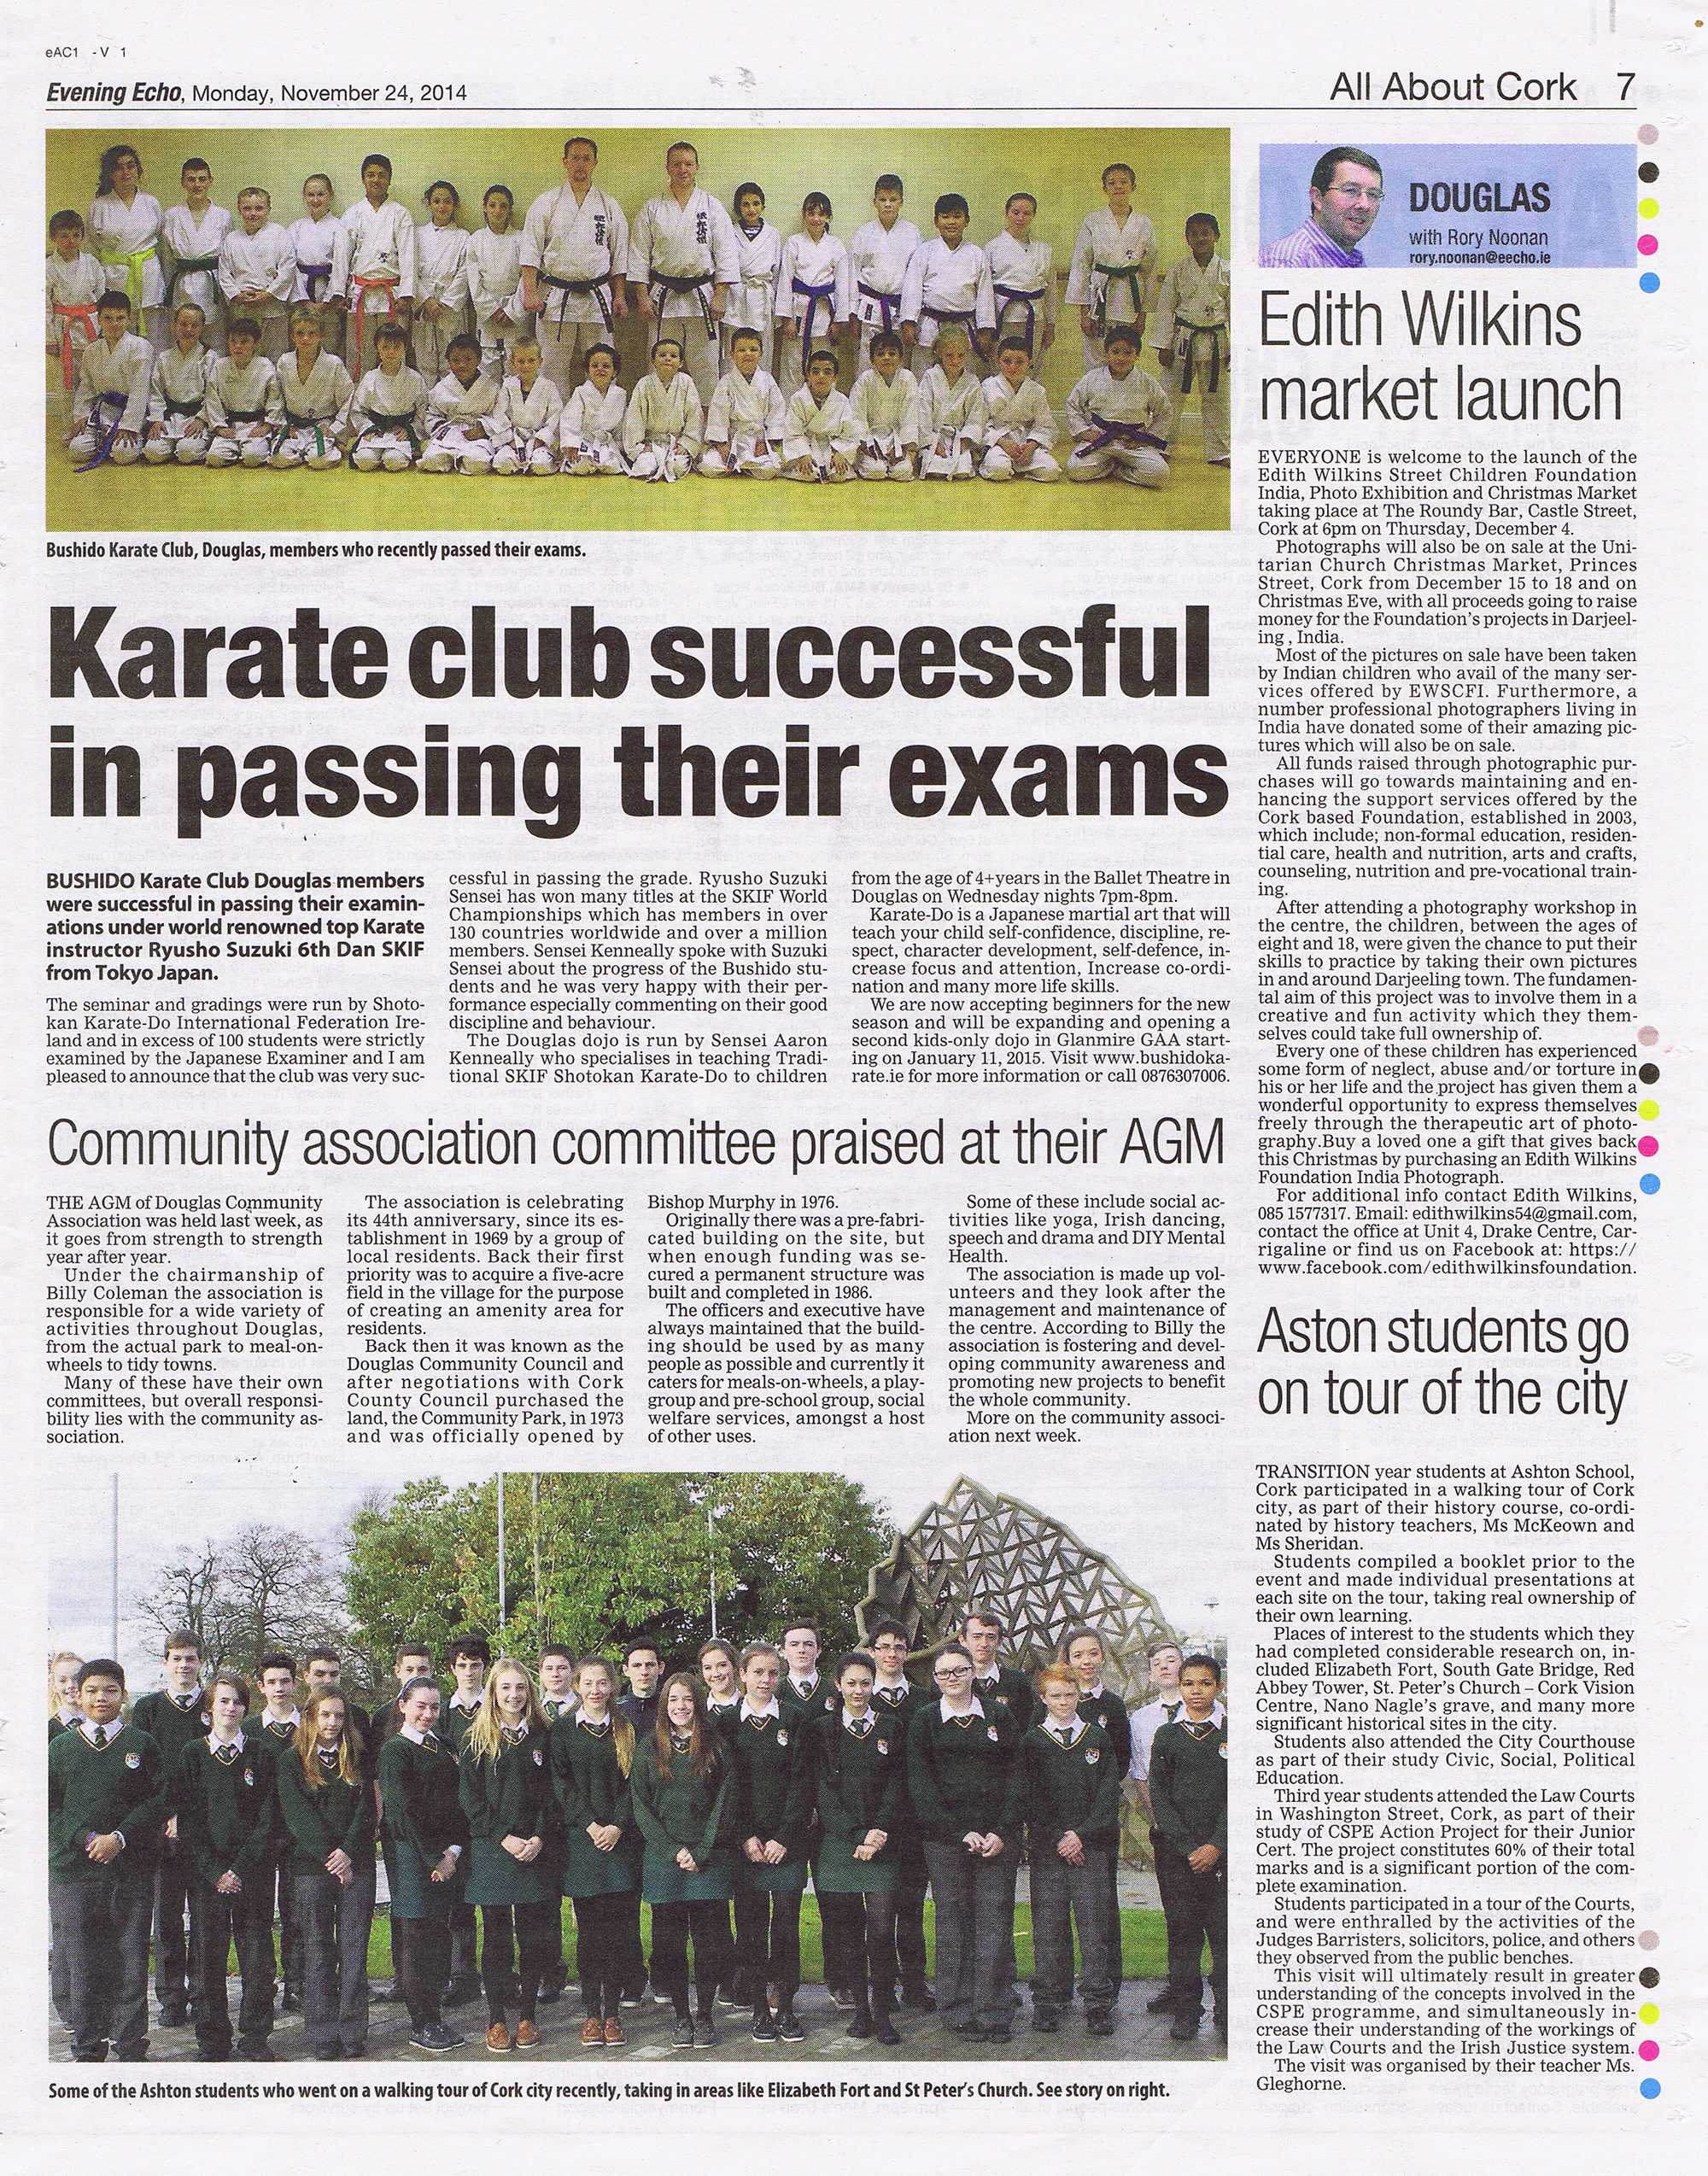 Evening Echo Feature - Karate club successful in passing their exams